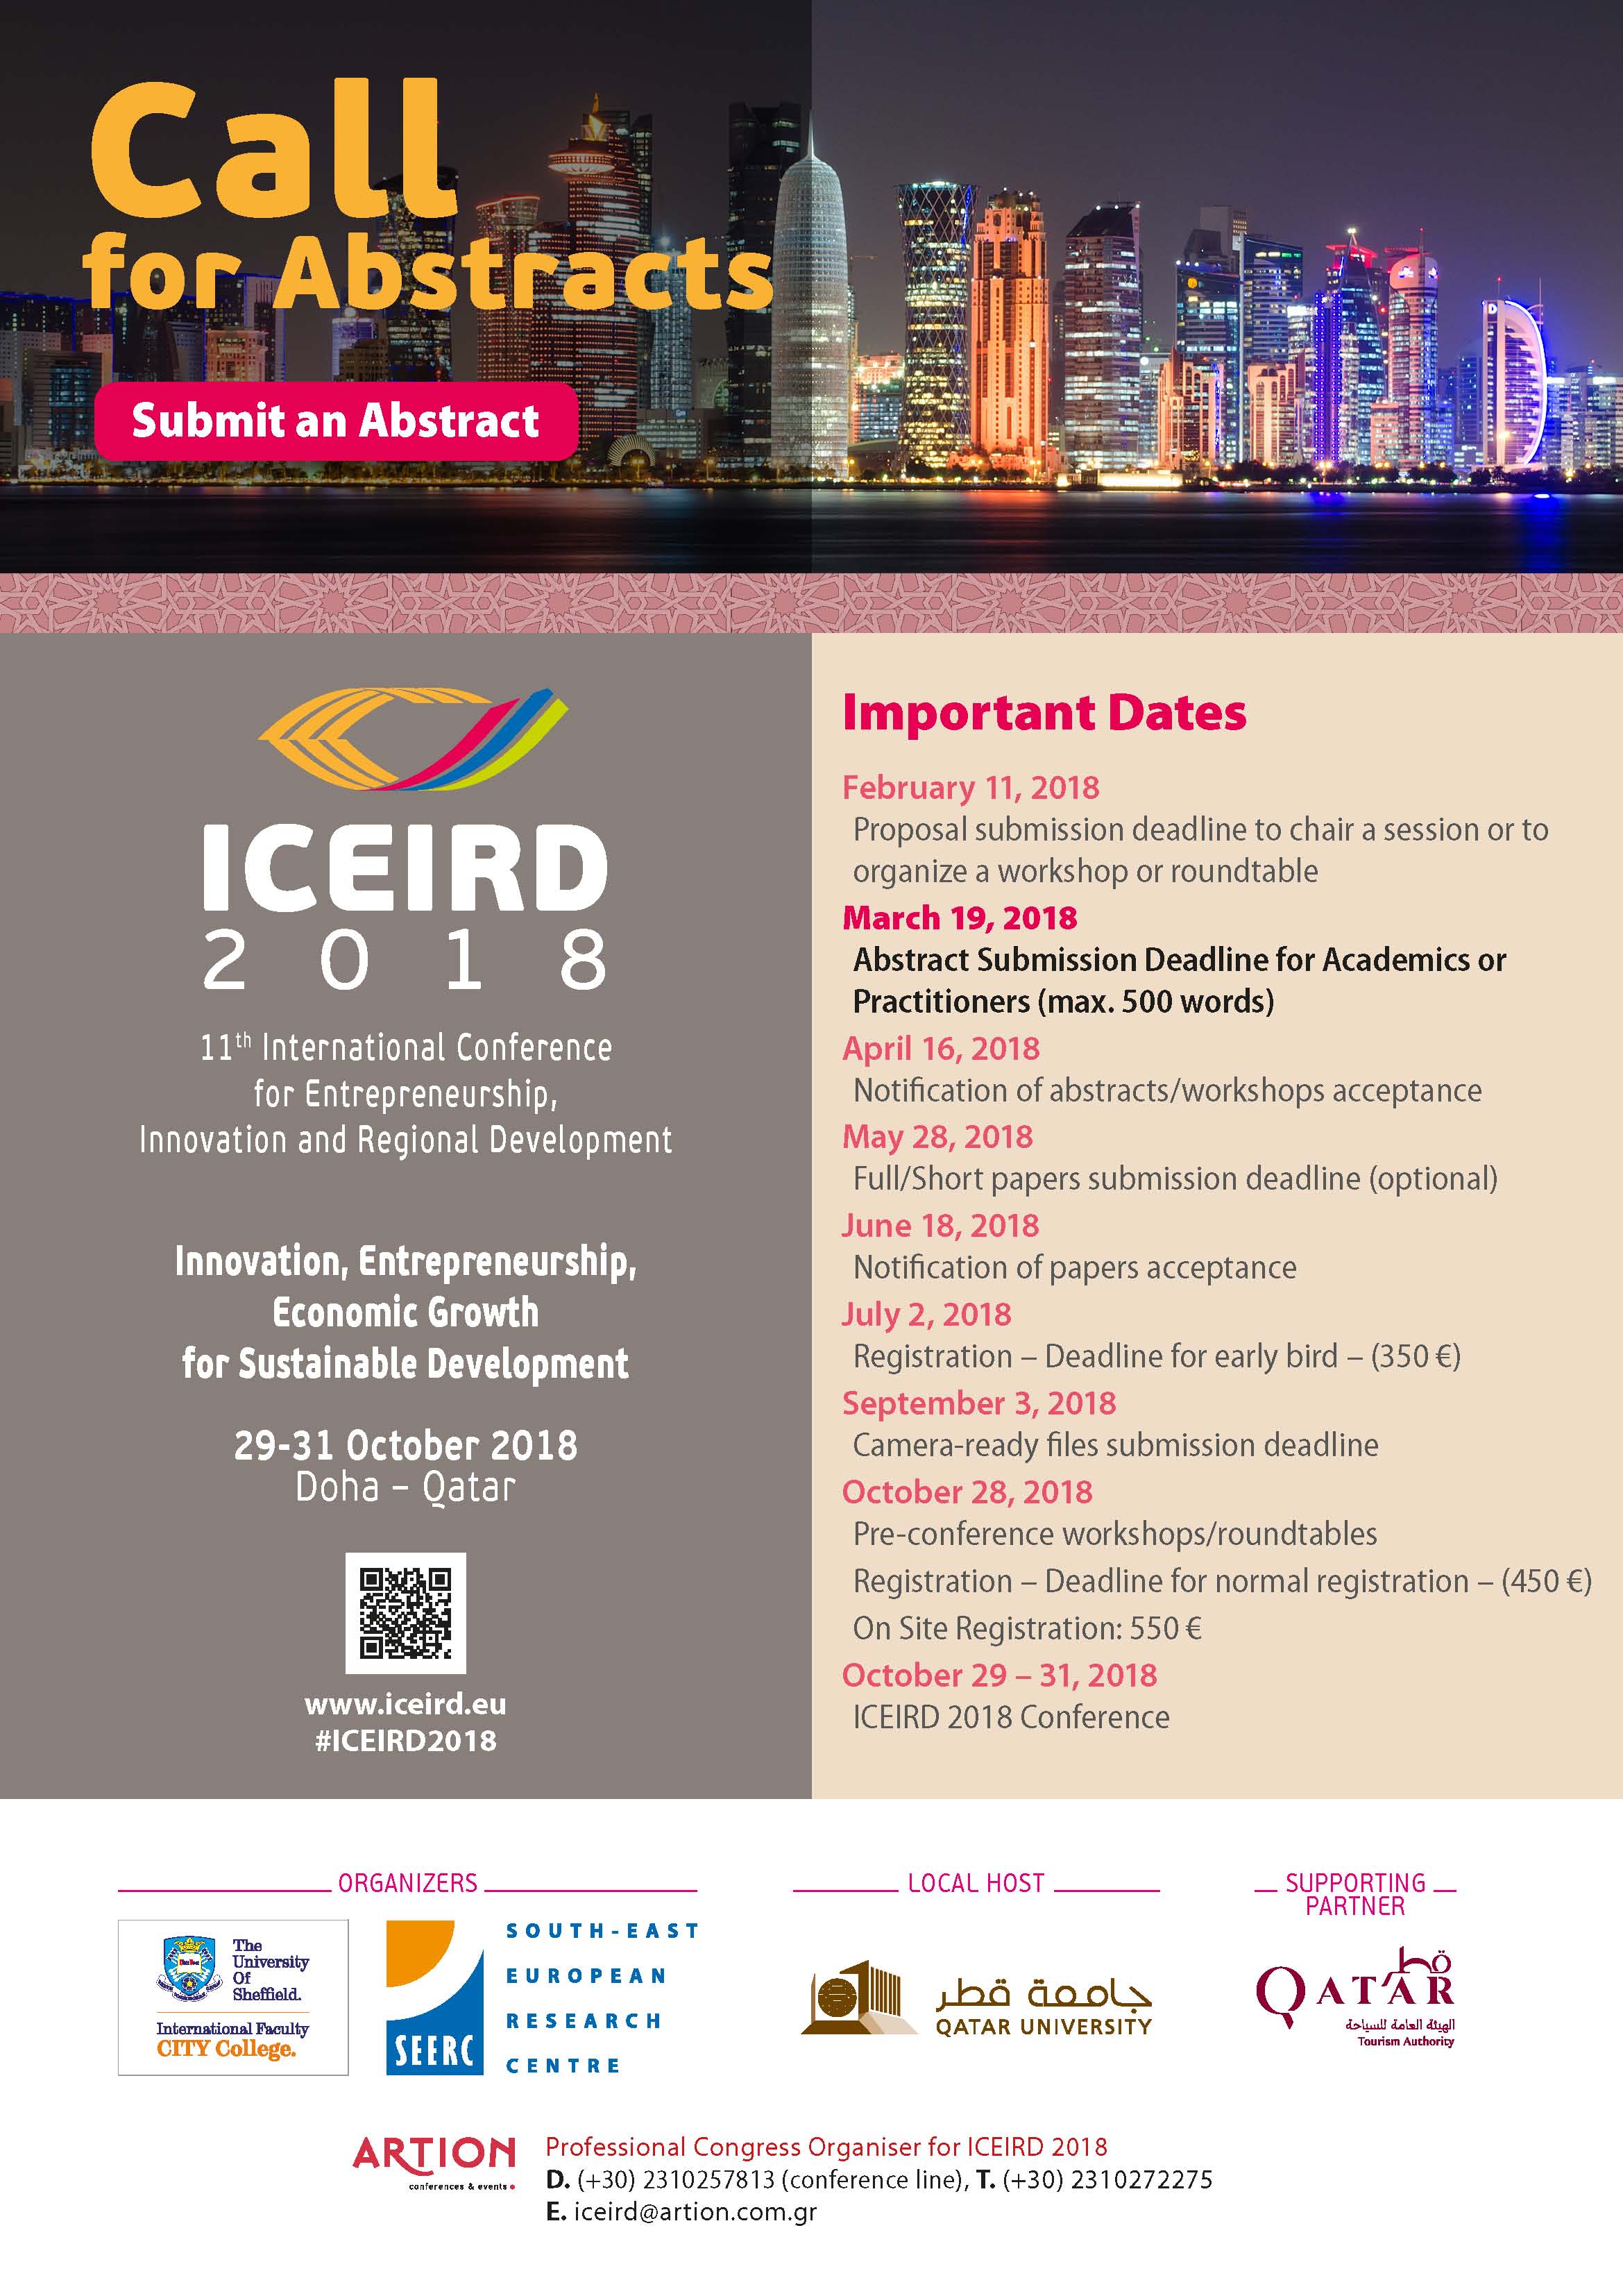 11th International Conference for Entrepreneurship, Innovation and Regional Development (ICEIRD 2018) Call for Abstracts